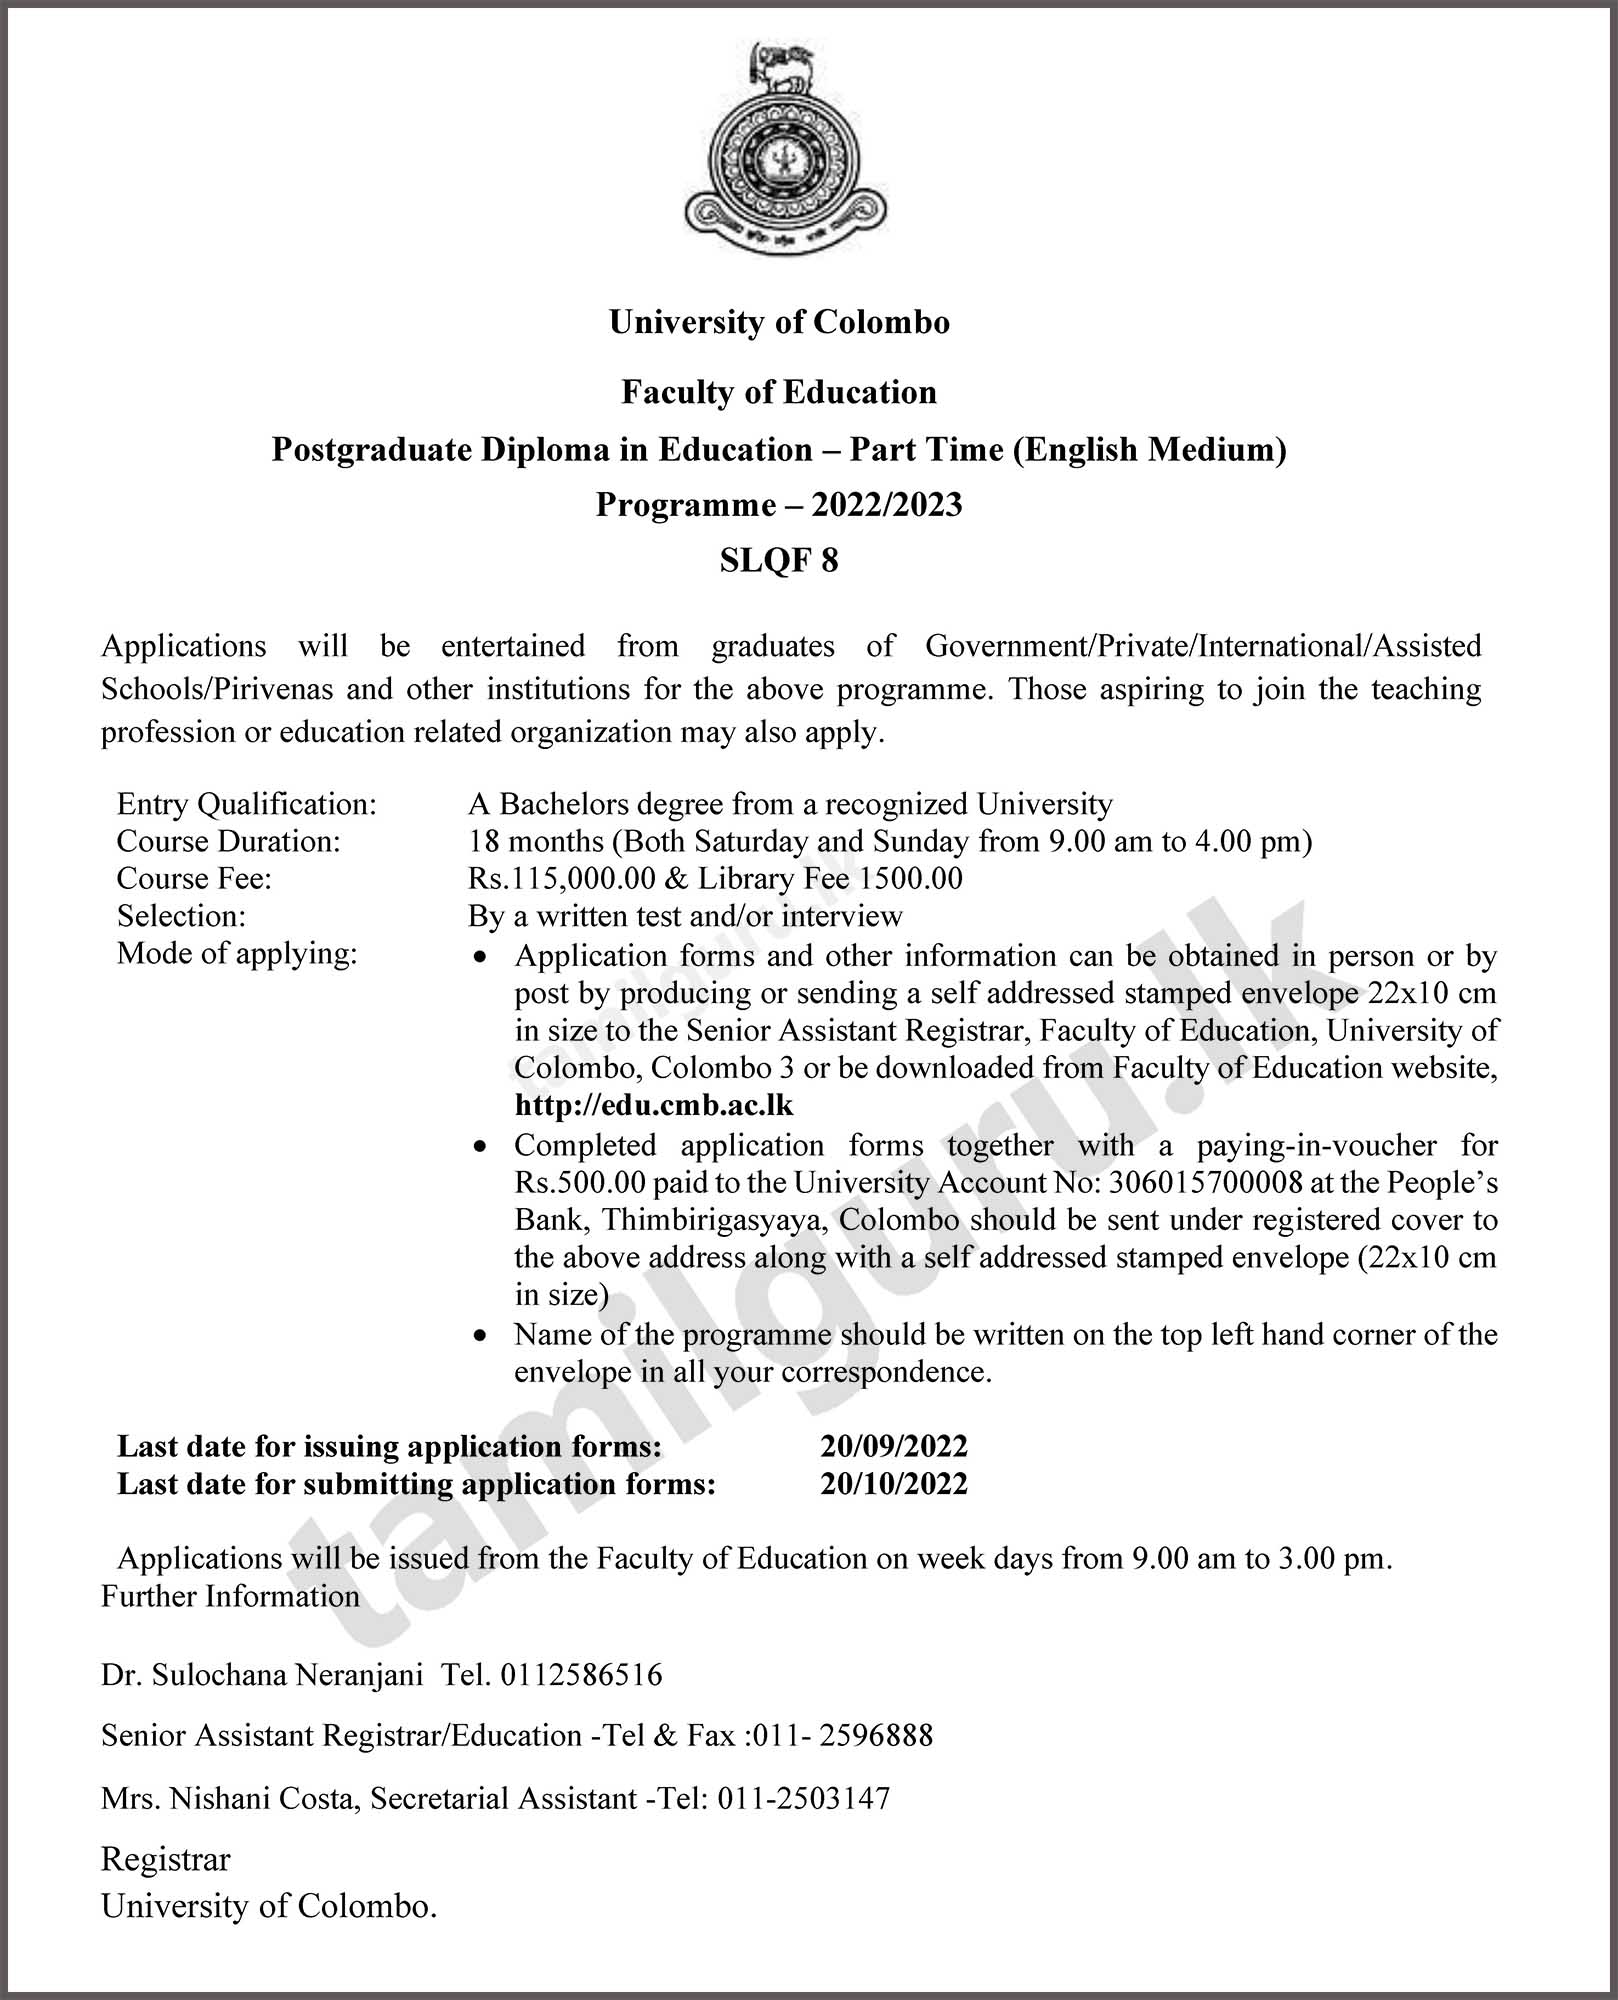 Calling for Applications - Postgraduate Diploma in Education (PGDE) (Part-Time) (English Medium) 2022/2023 from University of Colombo